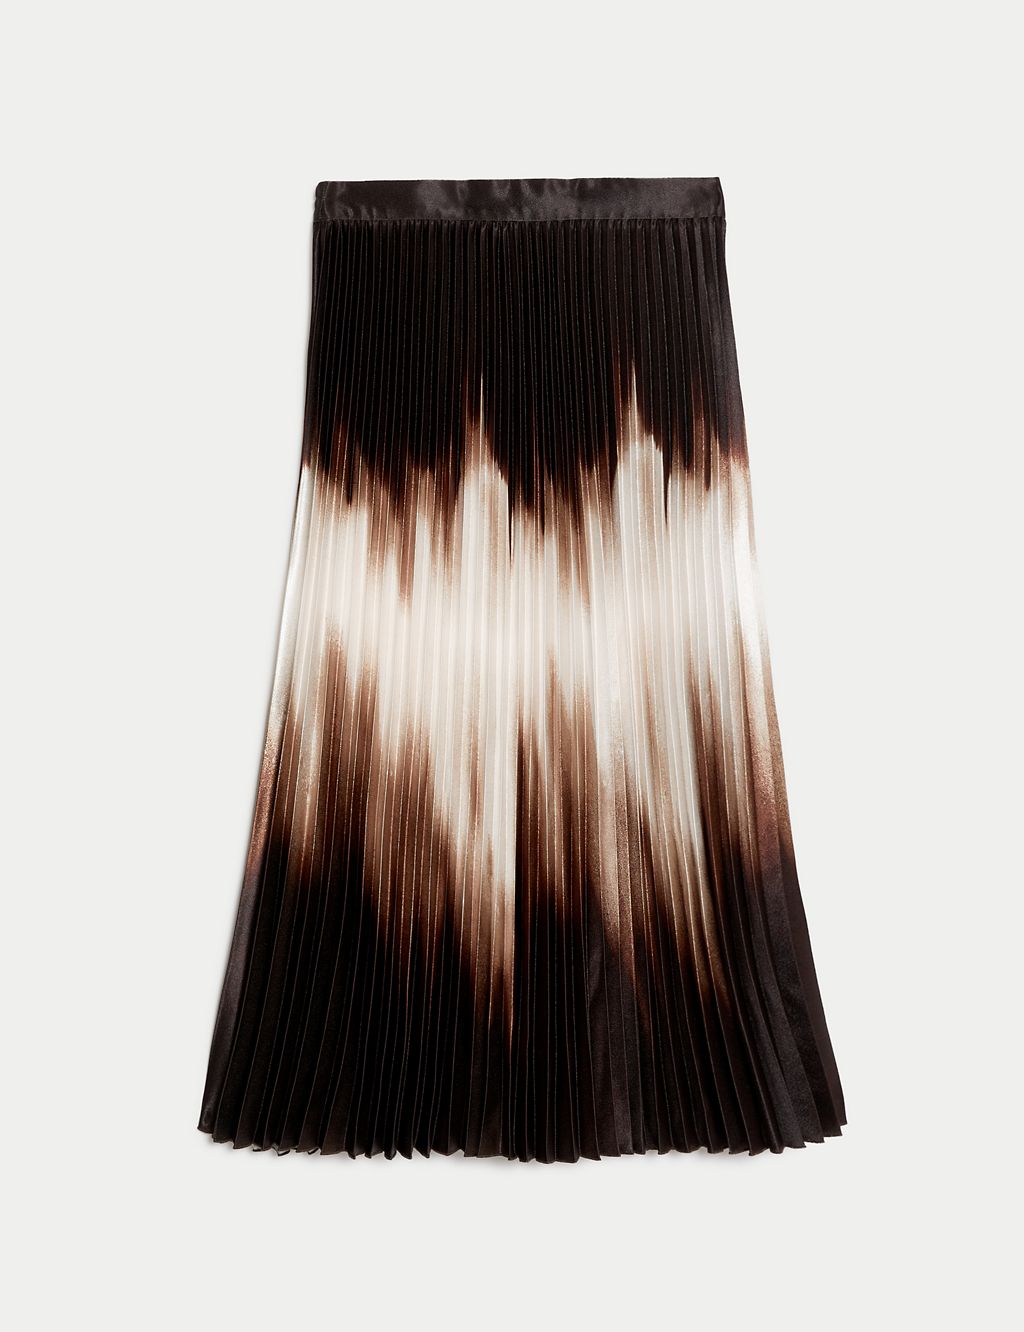 Satin Ombre Pleated Midaxi Skirt | M&S Collection | M&S